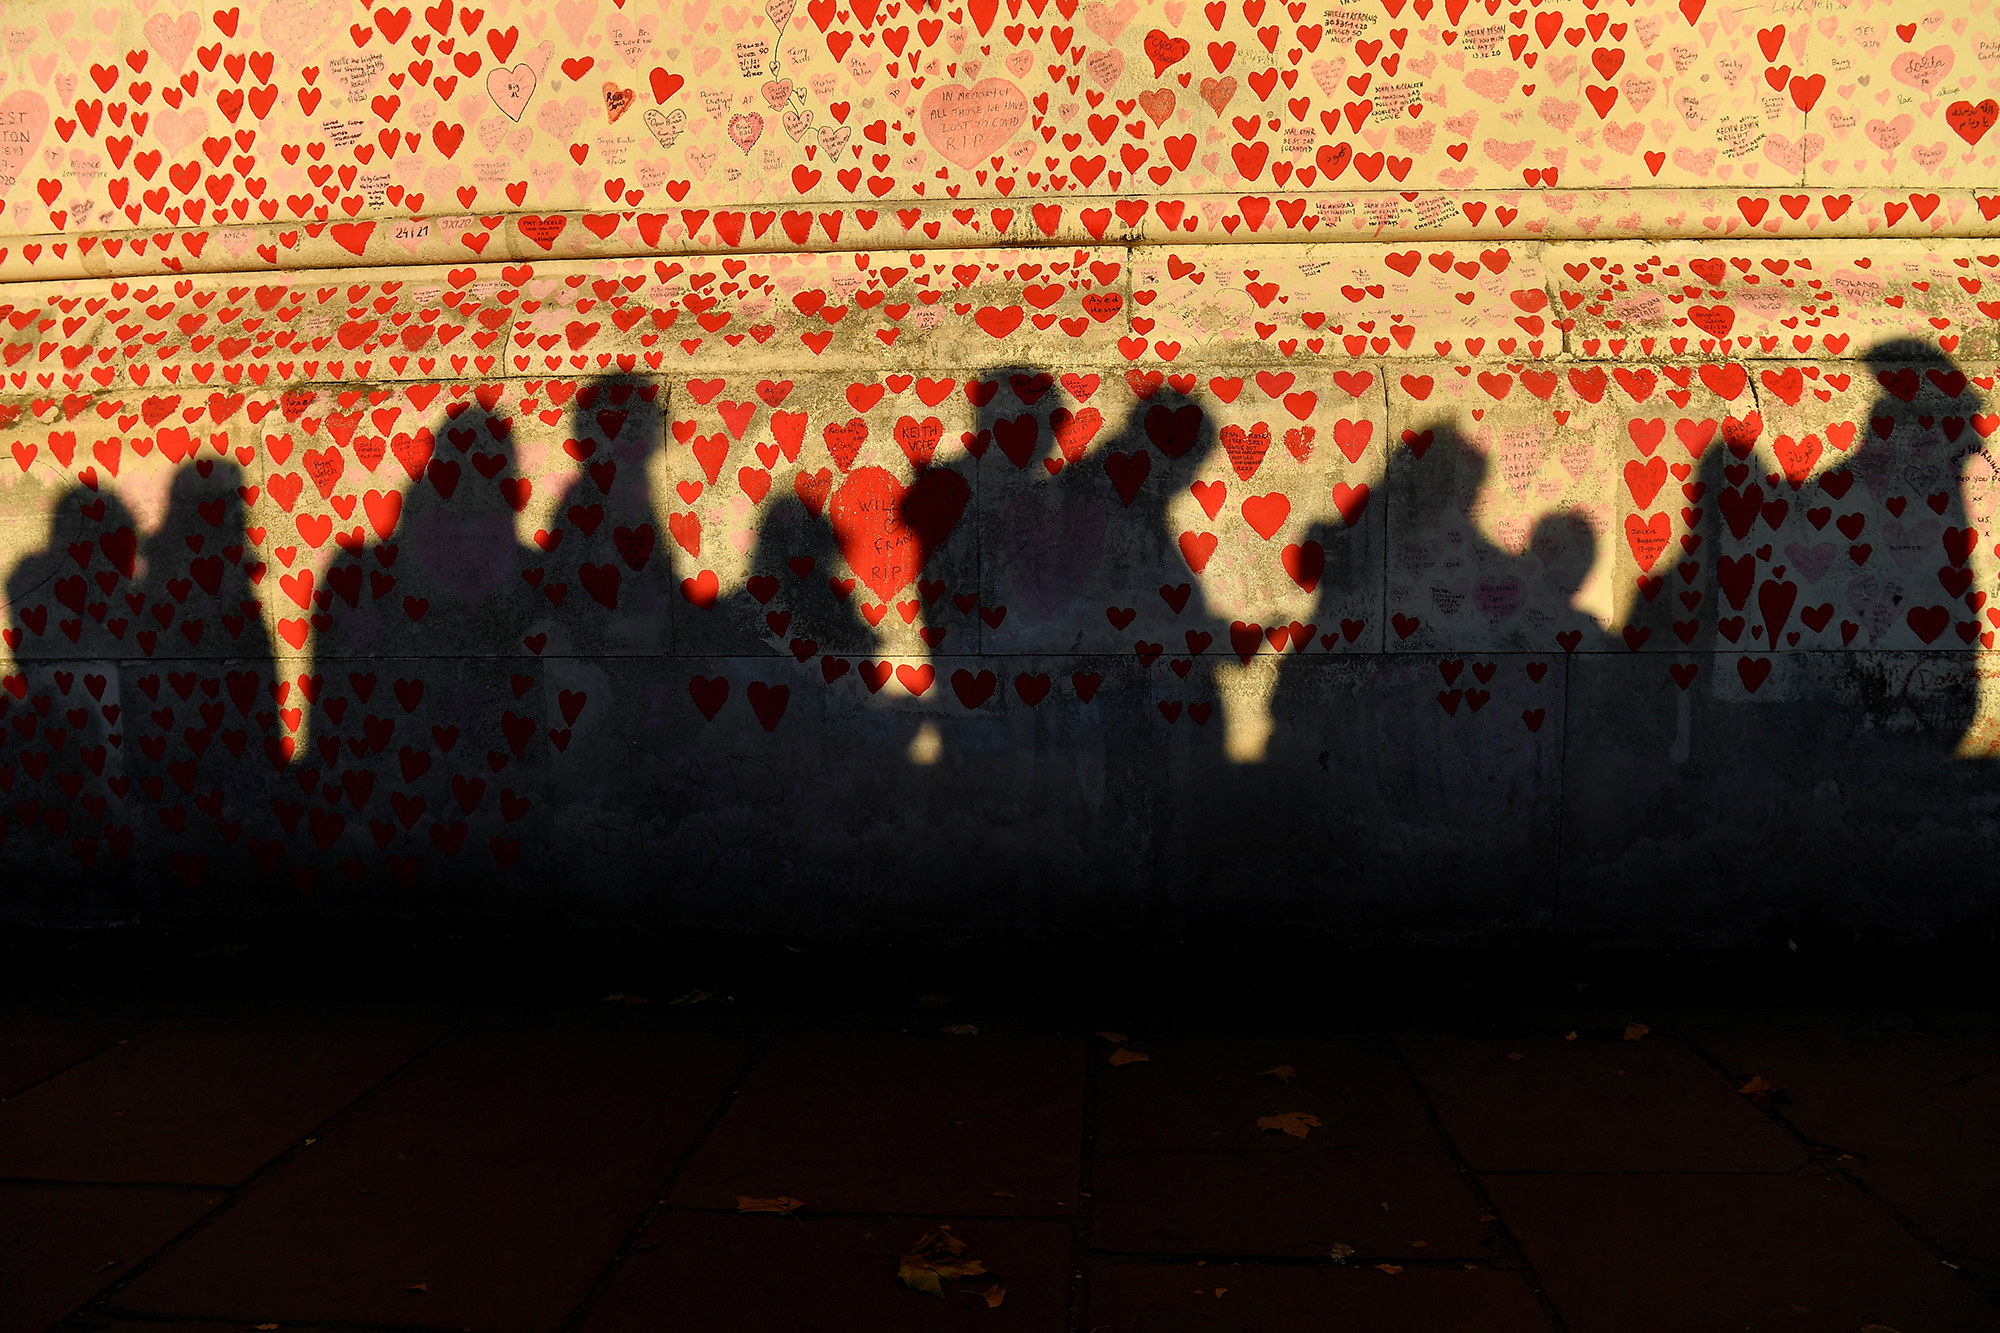 Shadows of people in the queue are reflected on a wall covered with heart drawings and messages